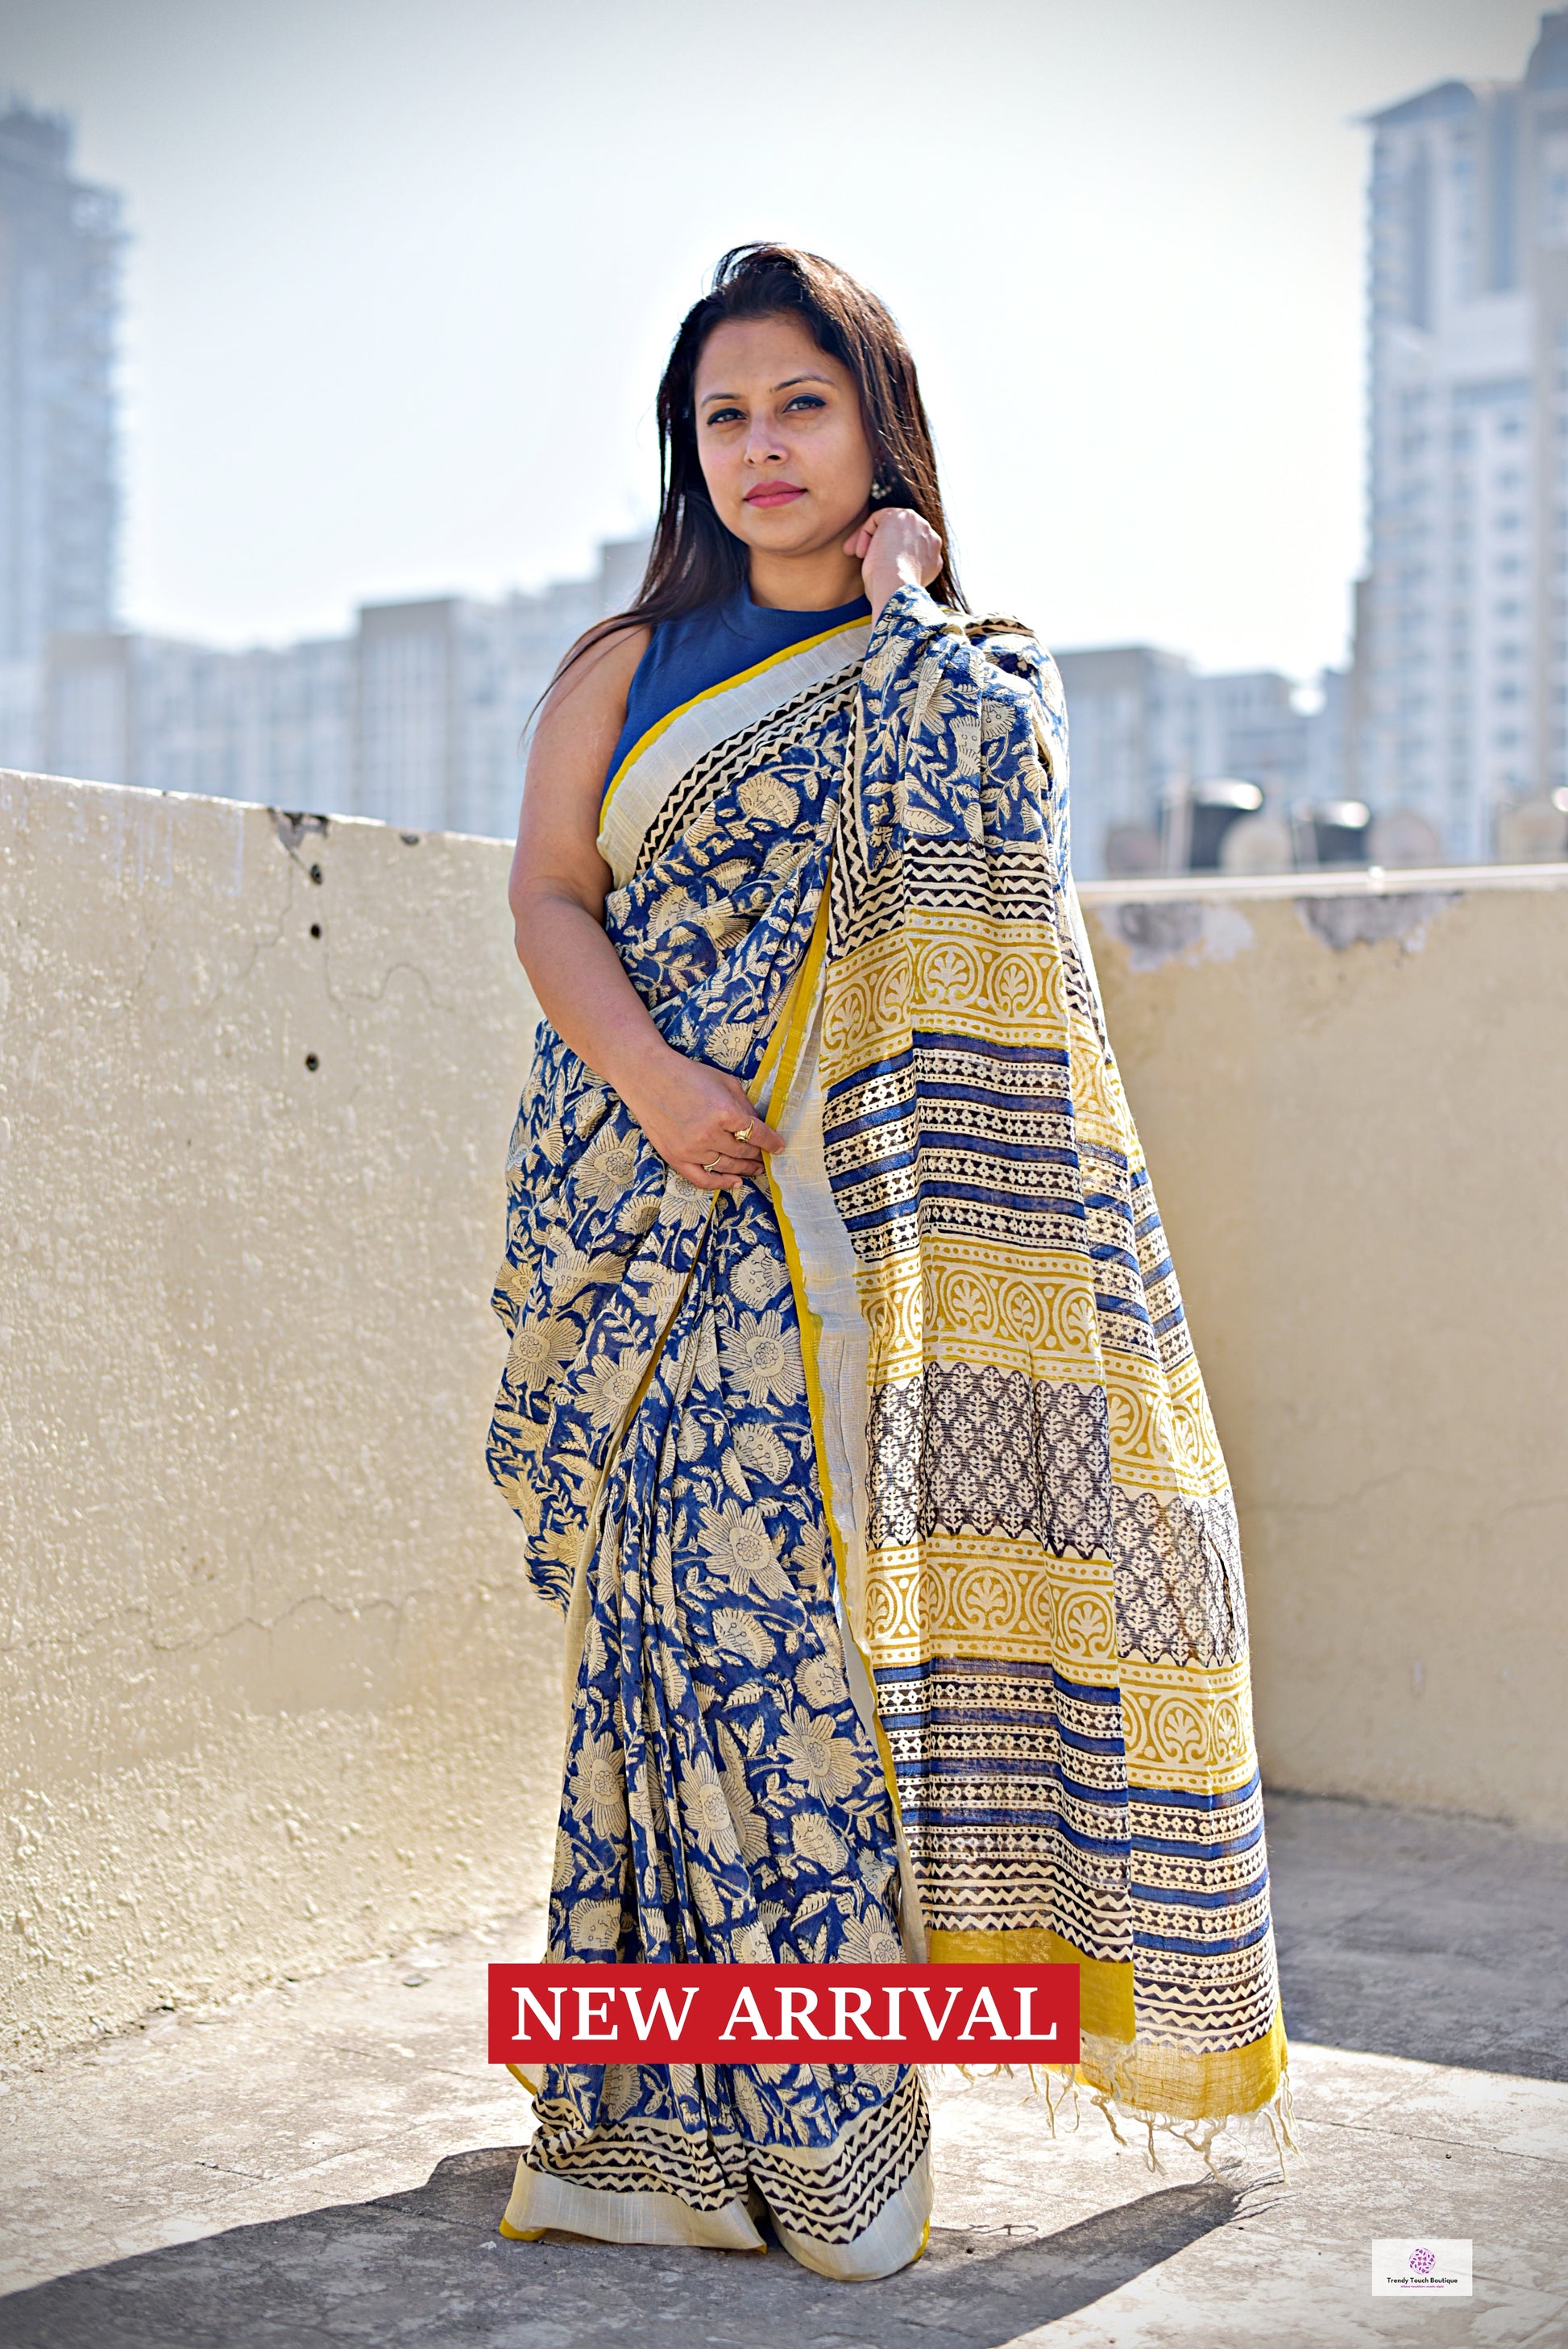 best summer handwoven handloom fabric handblock print organic slub linen saree yellow blue color at best price online with blouse piece for office wear or everyday styling!